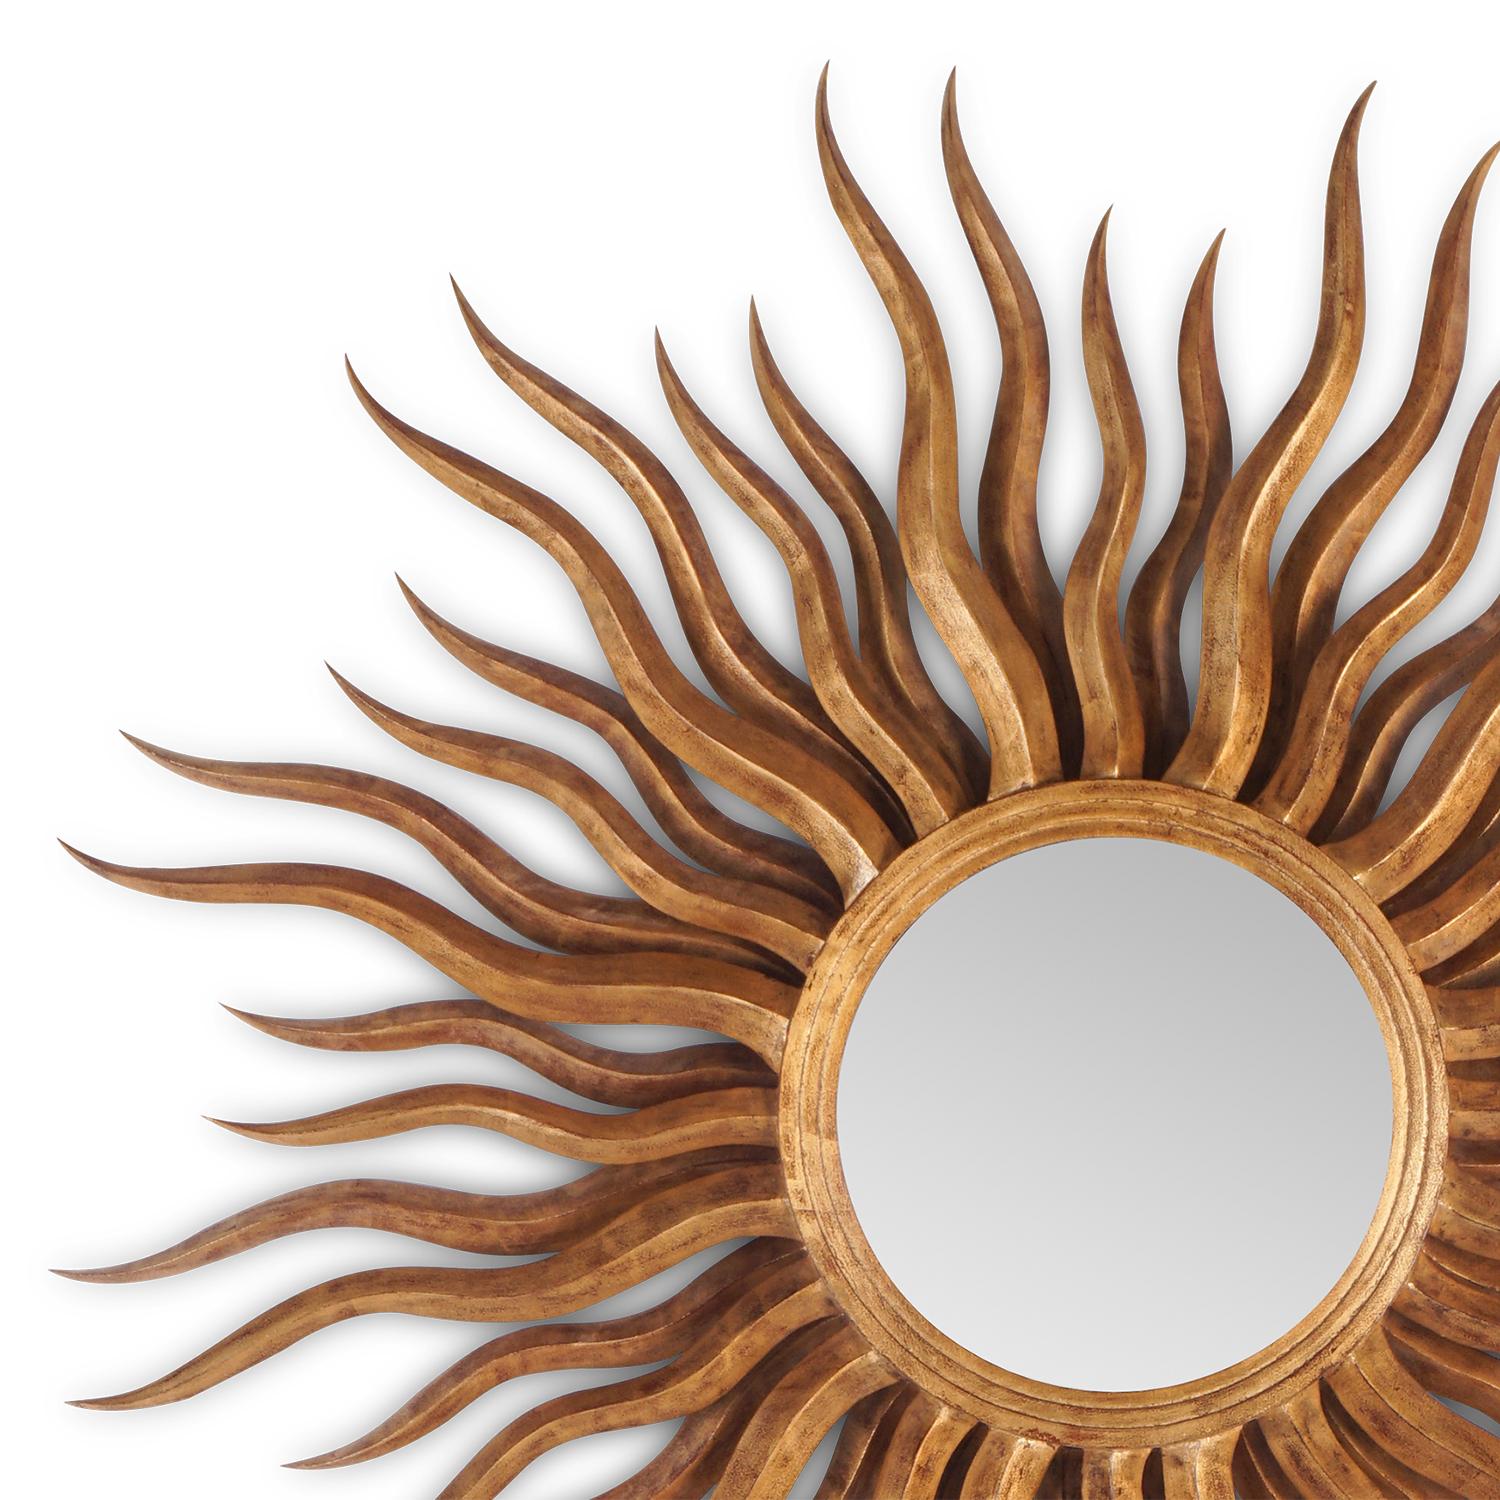 Mirror Sunny with structure in hand-carved mahogany
wood. Hand-painted in antique gold finish. With round 
mirror glass. 
Available in:
L110xD5xH110cm, price: 8300,00€.
L149xD6xH149cm, price: 9400,00€.
L189xD8xH189cm, price: 14500,00€.